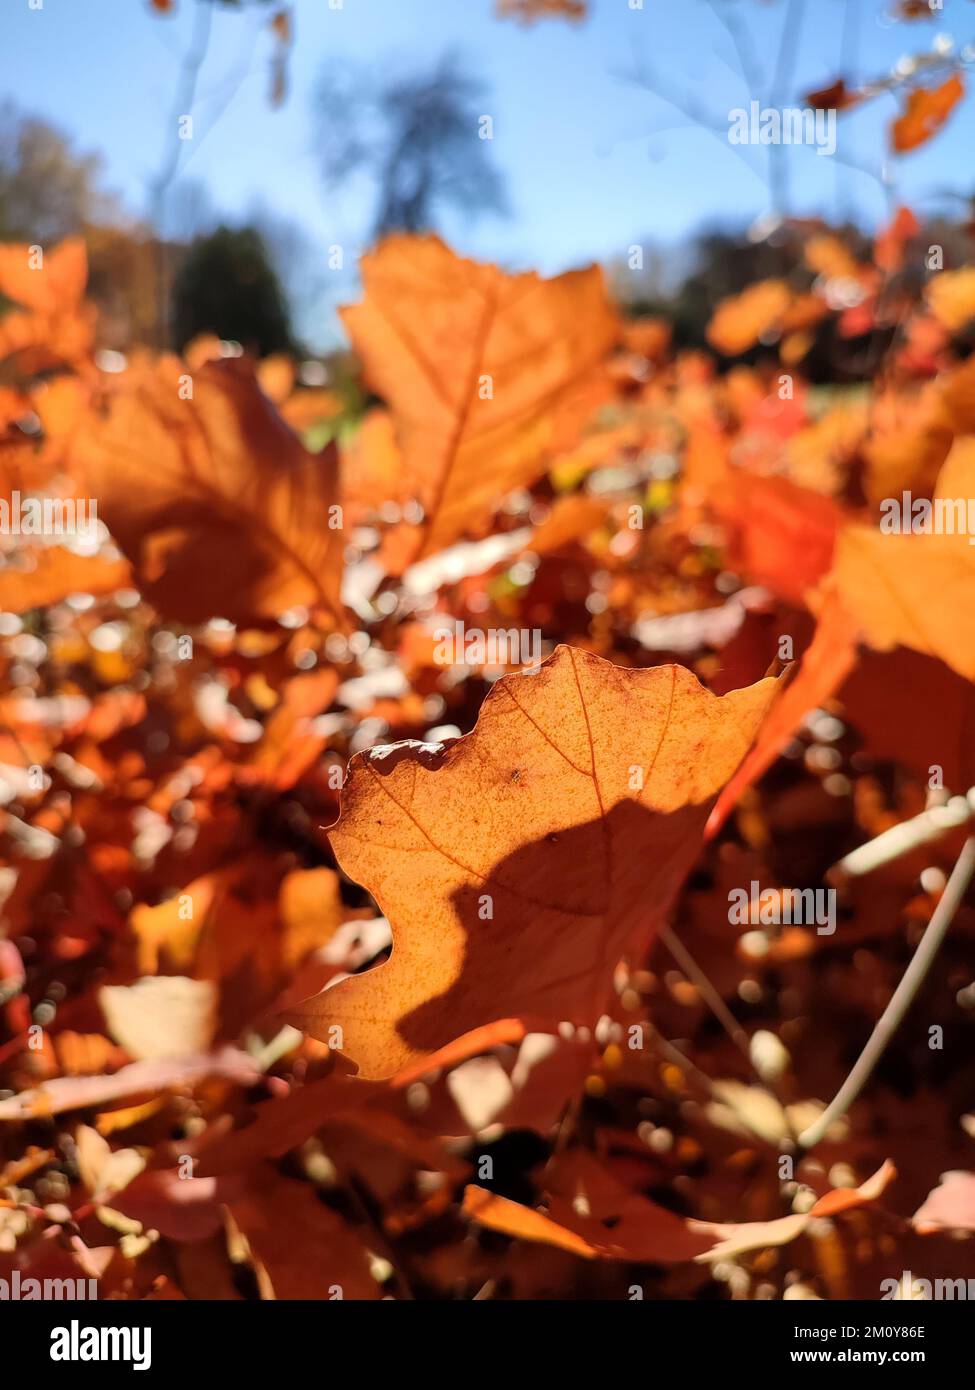 The edge of a red-orange-brown oak leaf on background of many blurred oak leaves of small young sprouts in clearing in forest, which brightly illuminated by shining sun on sunny autumn day close-up Stock Photo